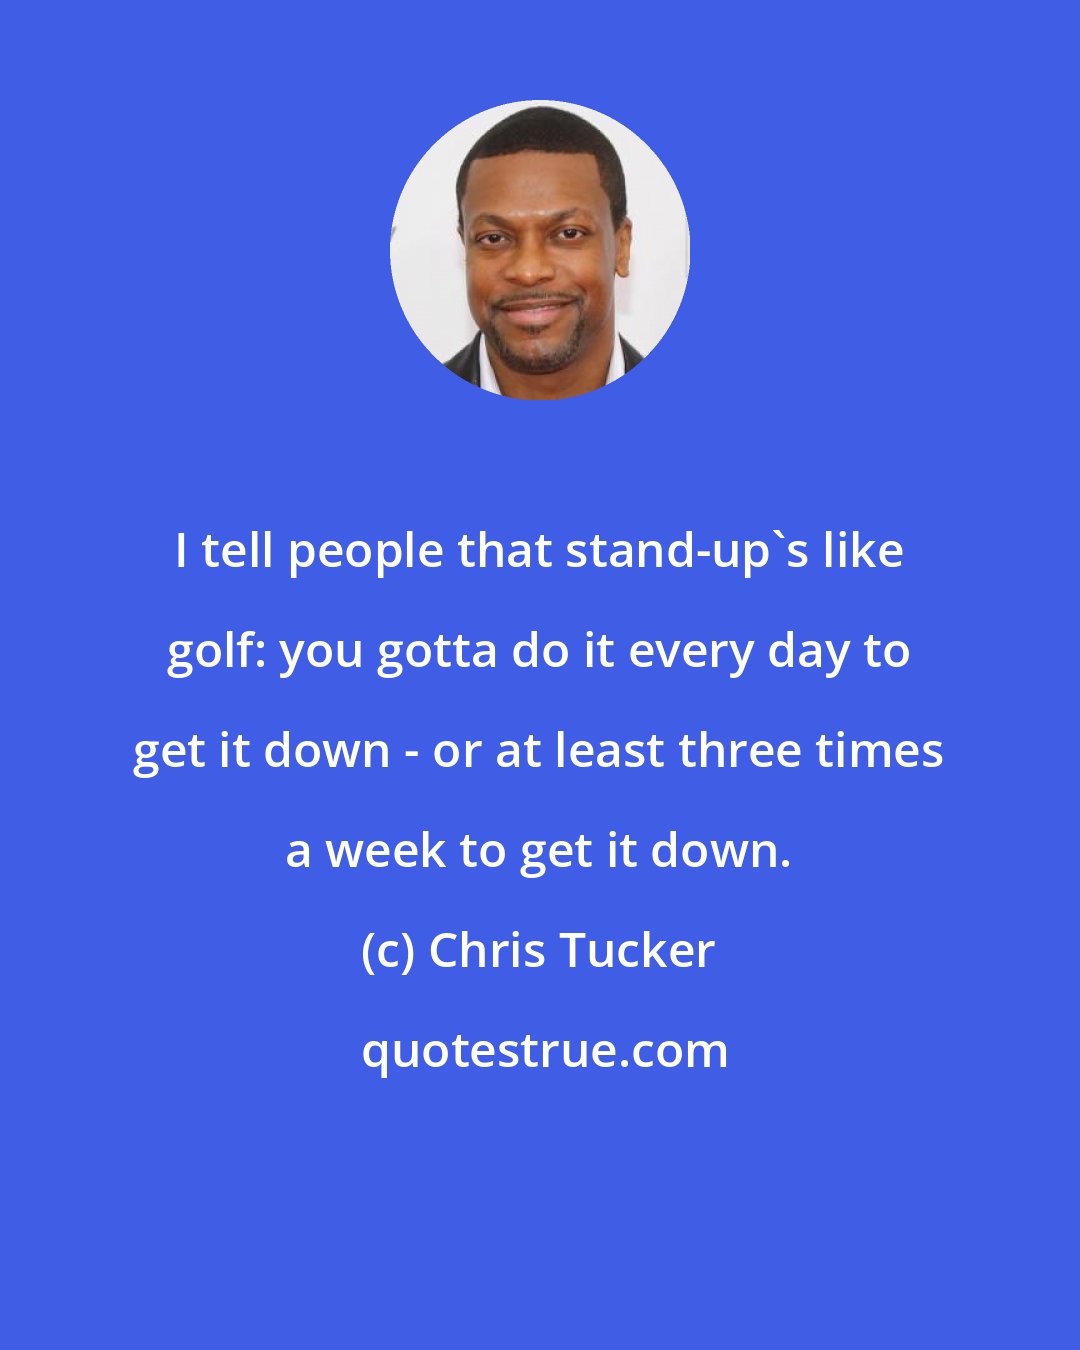 Chris Tucker: I tell people that stand-up's like golf: you gotta do it every day to get it down - or at least three times a week to get it down.